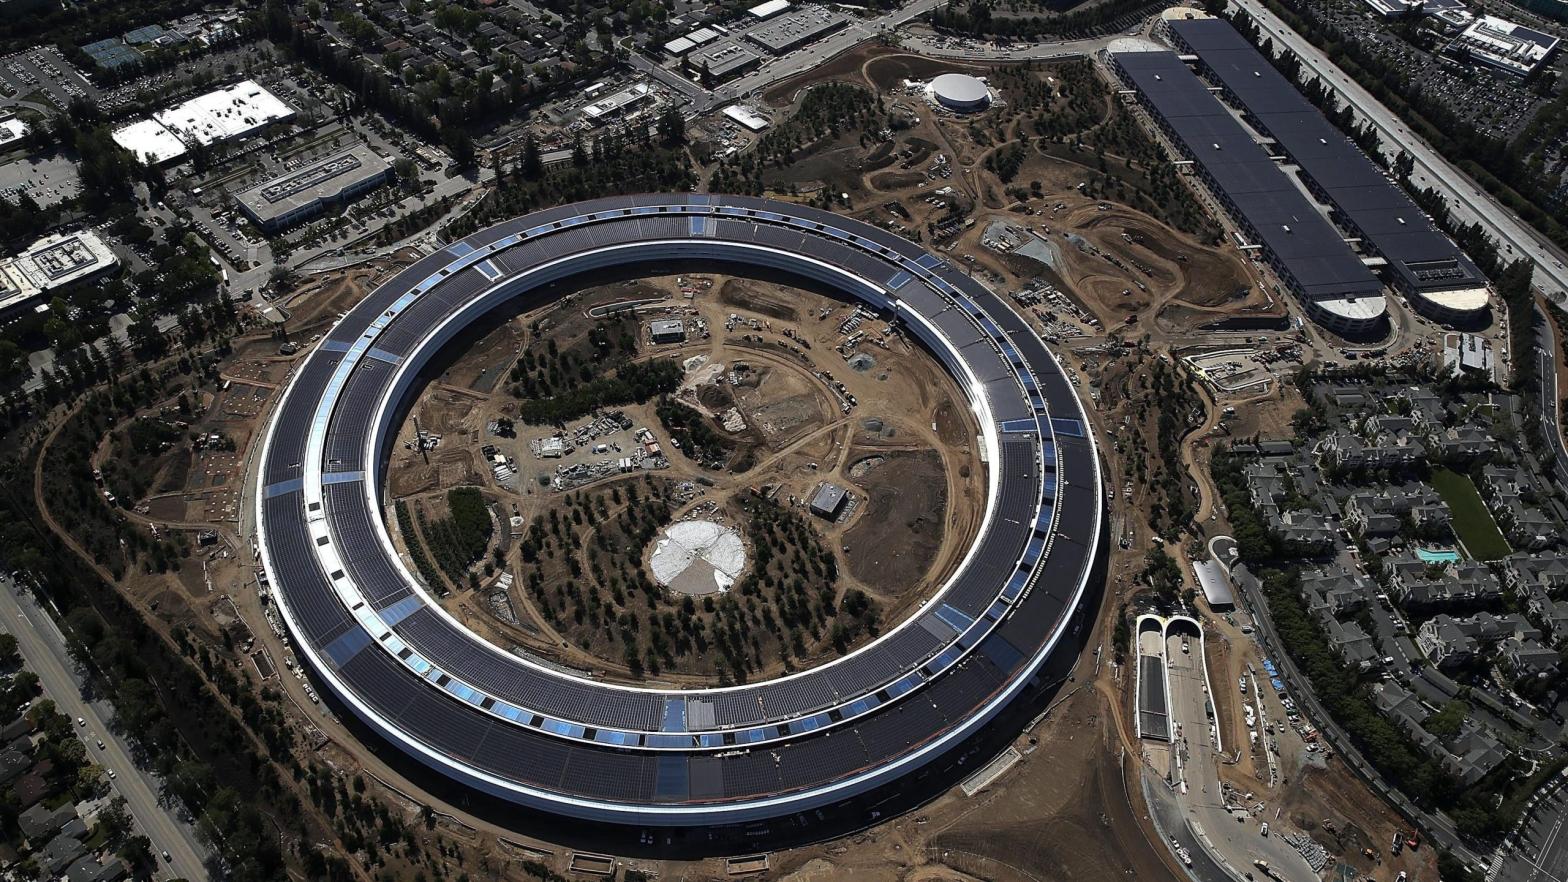 An aerial view of Apple Park, the company's headquarters, on April 28, 2017 in Cupertino, California. (Photo: Justin Sullivan, Getty Images)